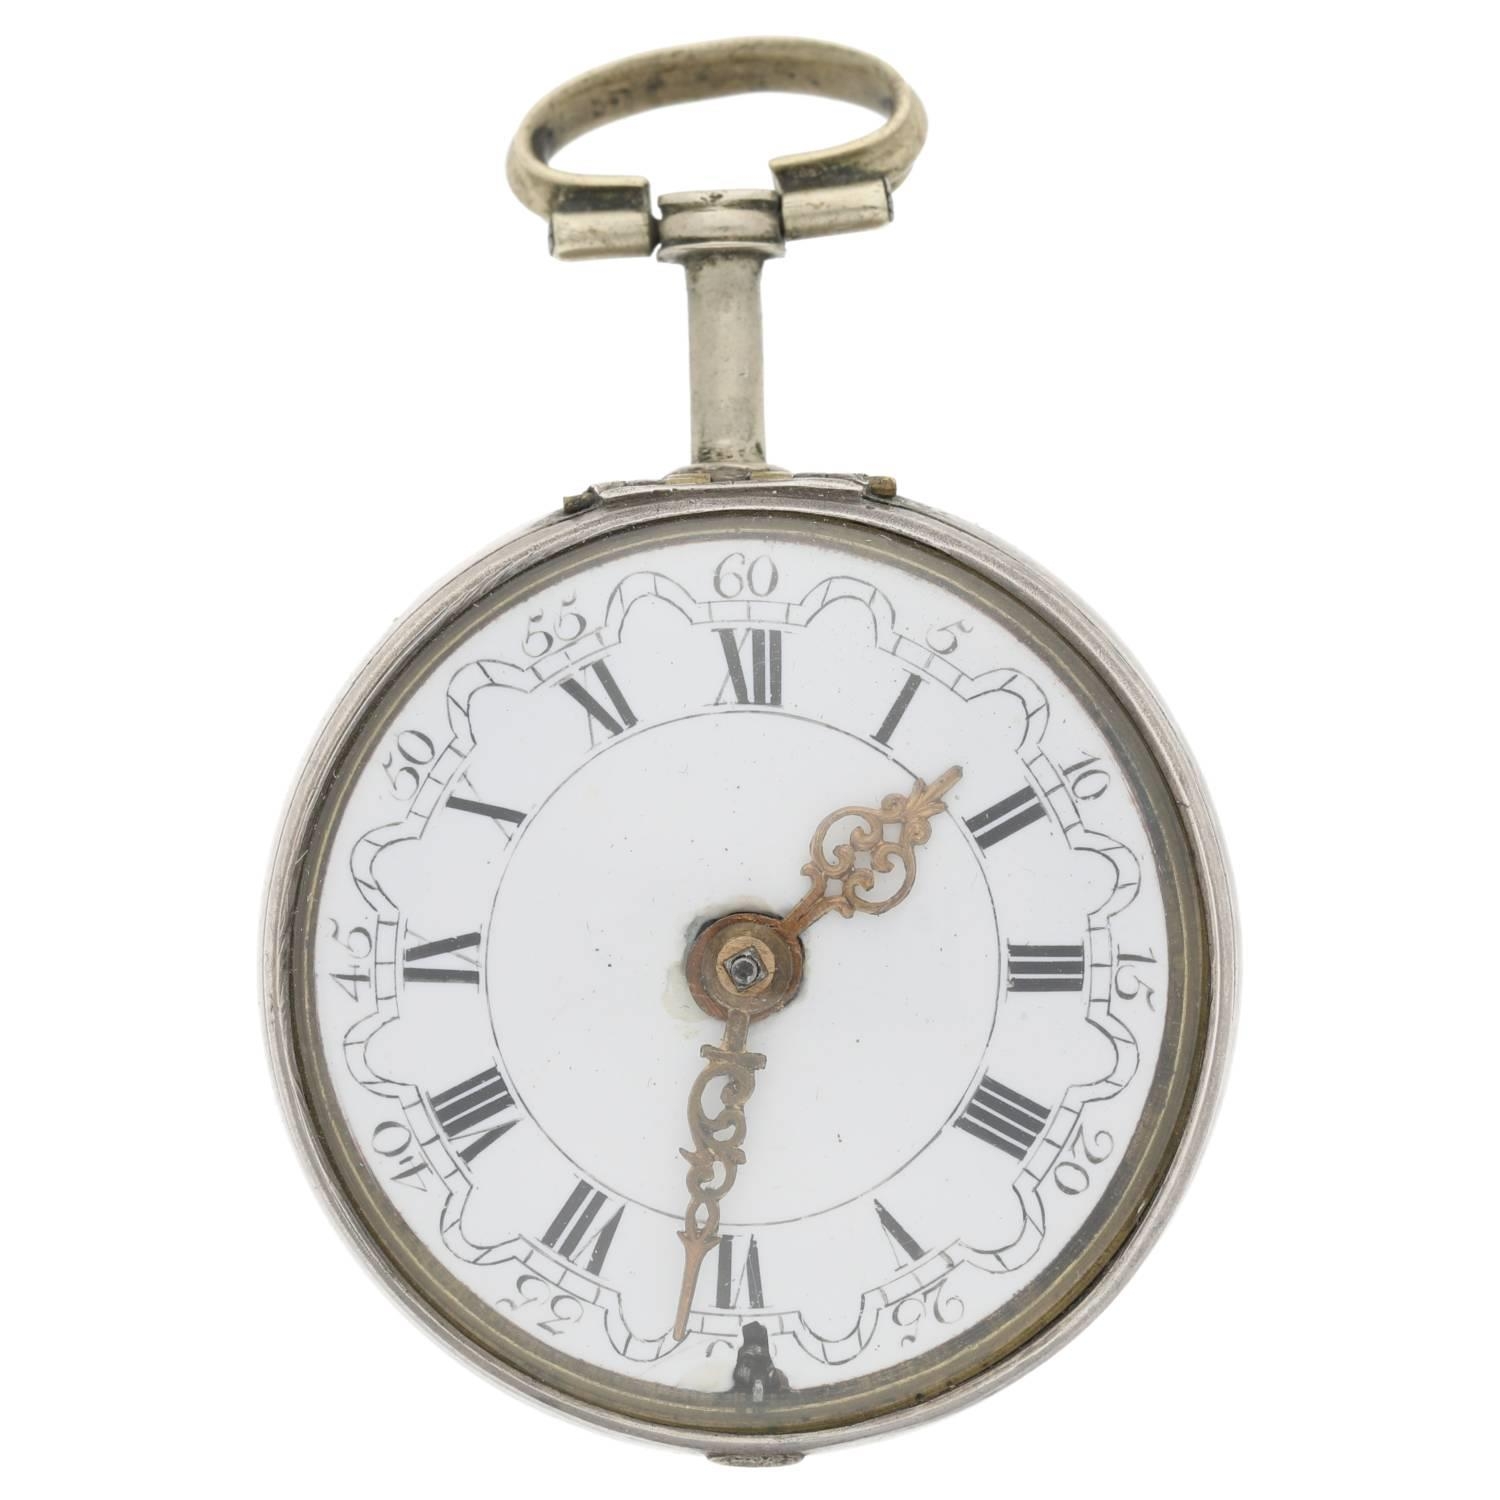 Mich Reanes, London - English 18th century repoussé silver pair cased verge pocket watch, London - Image 3 of 10